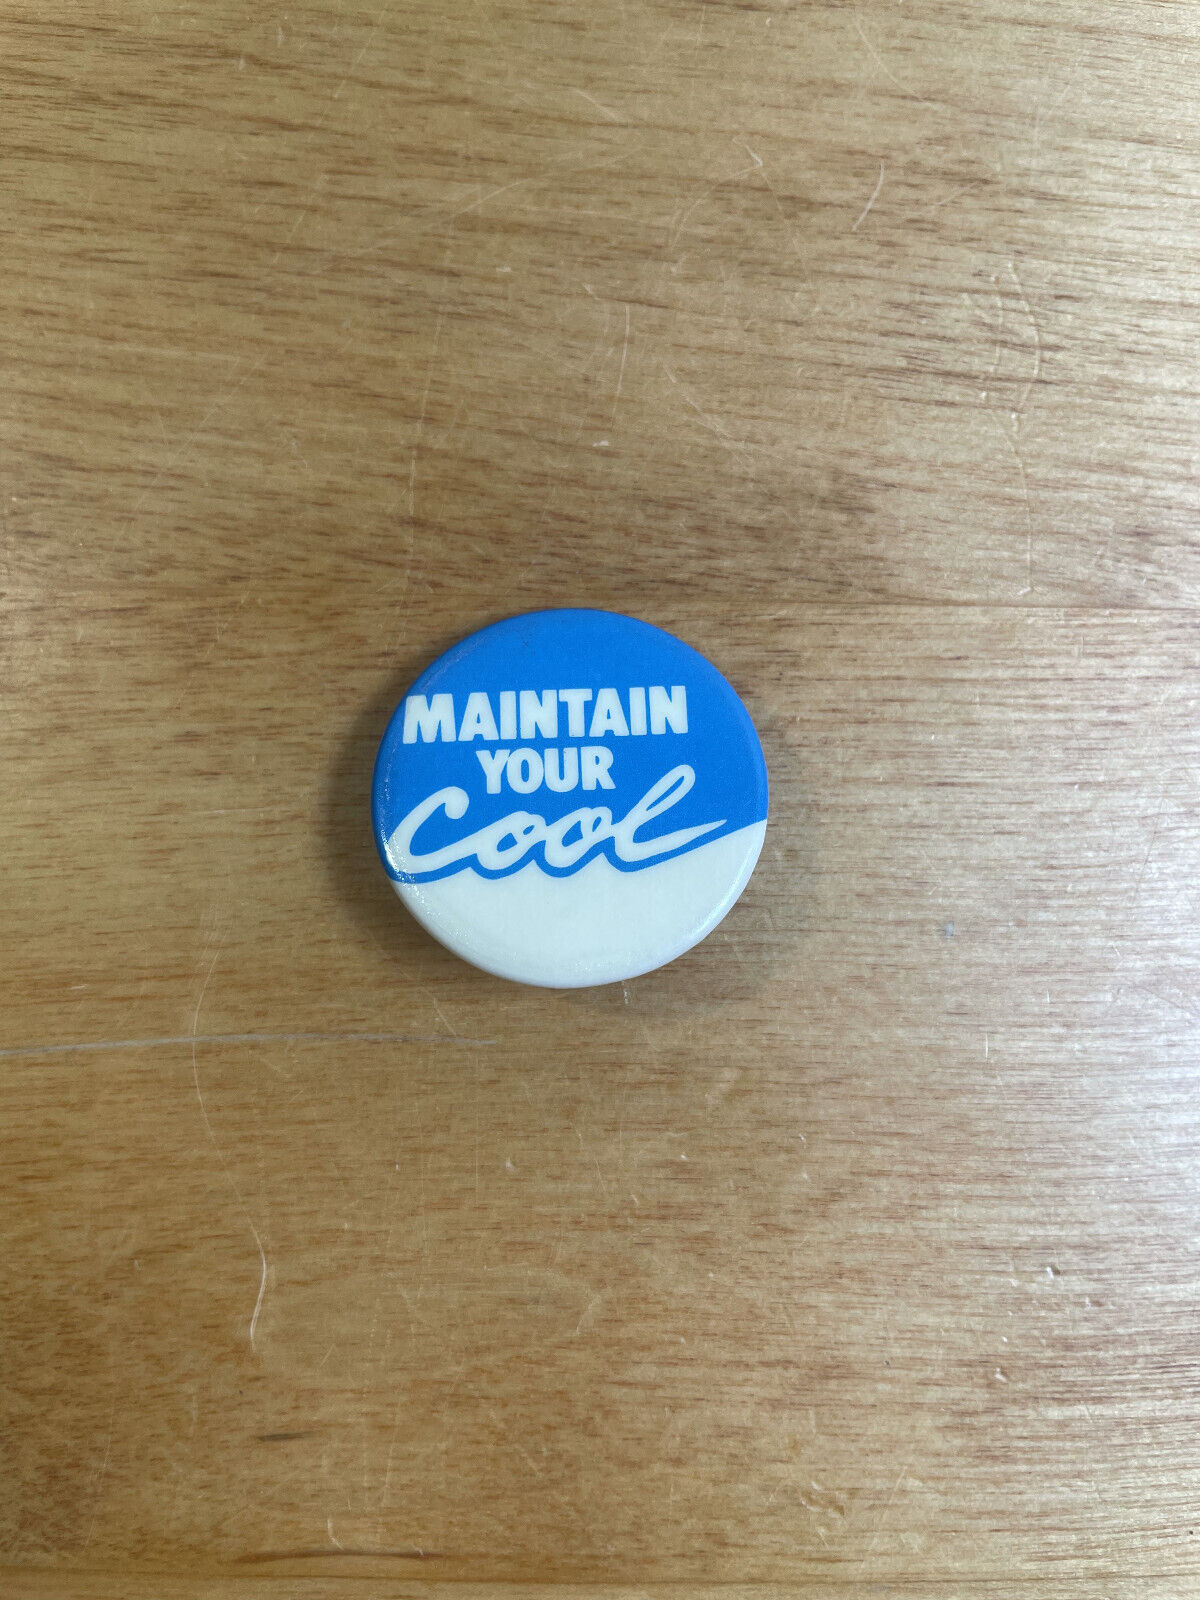 Maintain Your Cool Blue White Image Graphic Vintage Metal Pinback Pin Button